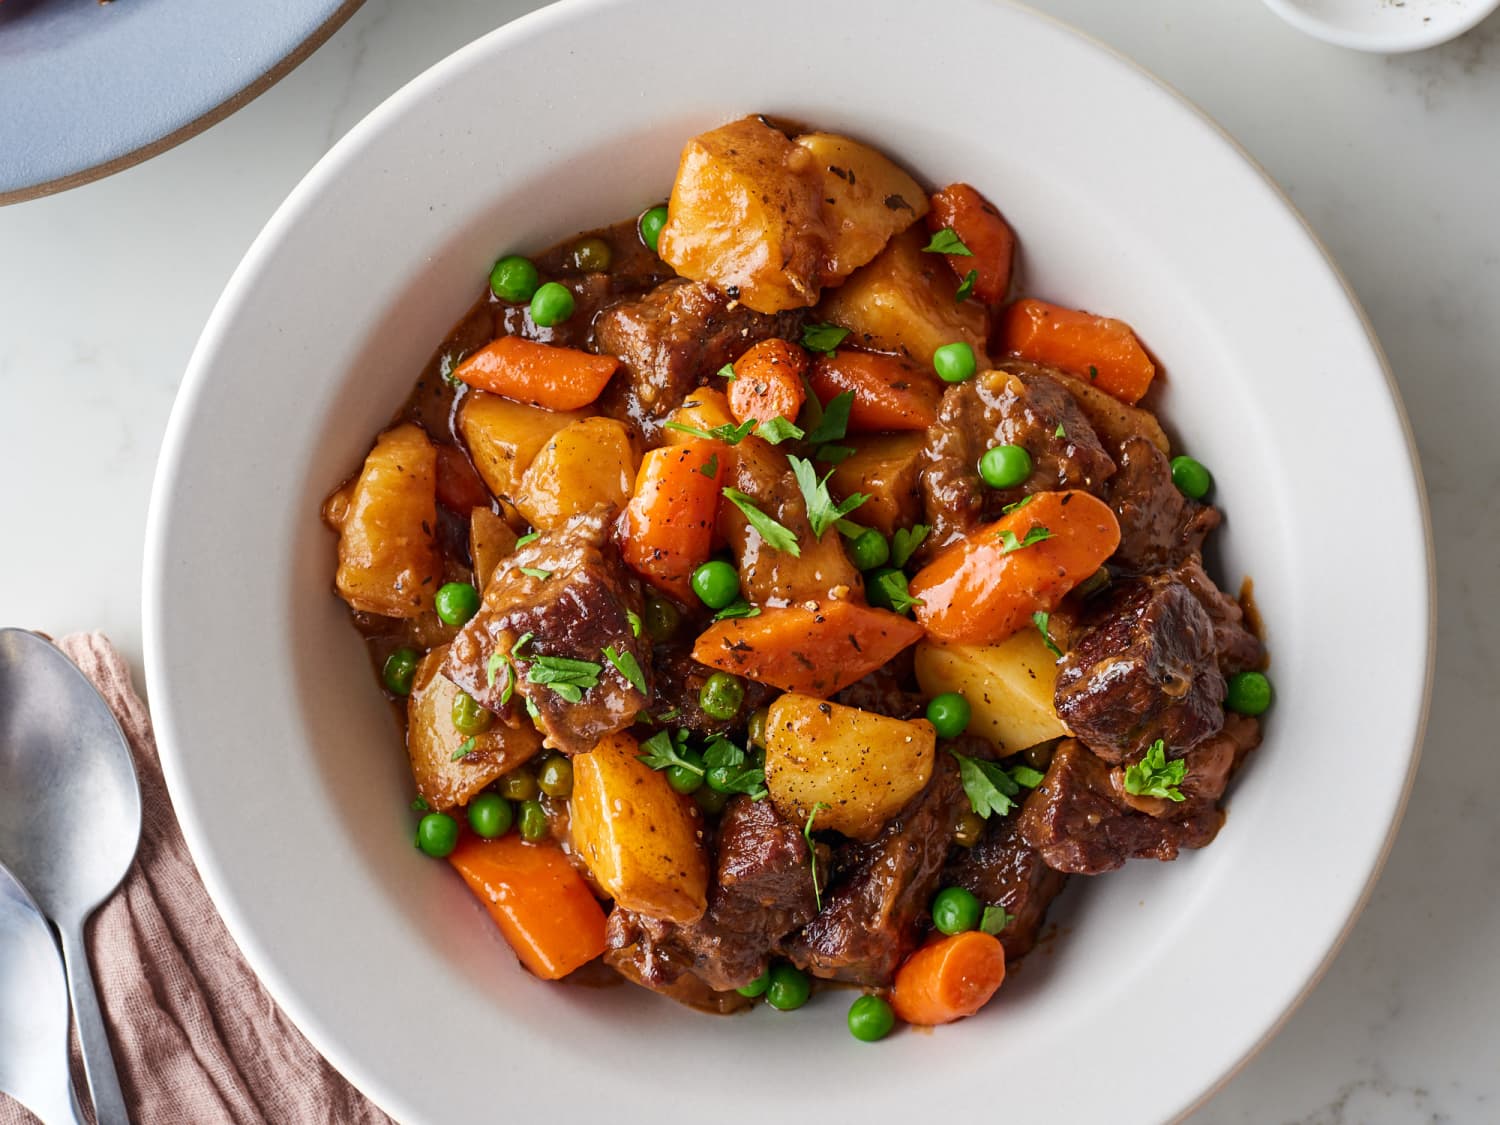 https://cdn.apartmenttherapy.info/image/upload/f_jpg,q_auto:eco,c_fill,g_auto,w_1500,ar_4:3/k%2FPhoto%2FRecipes%2F2019-10-how-to-instant-pot-beef-stew%2F2019-10-21_Kitchn88948_HT-Beef-Stew